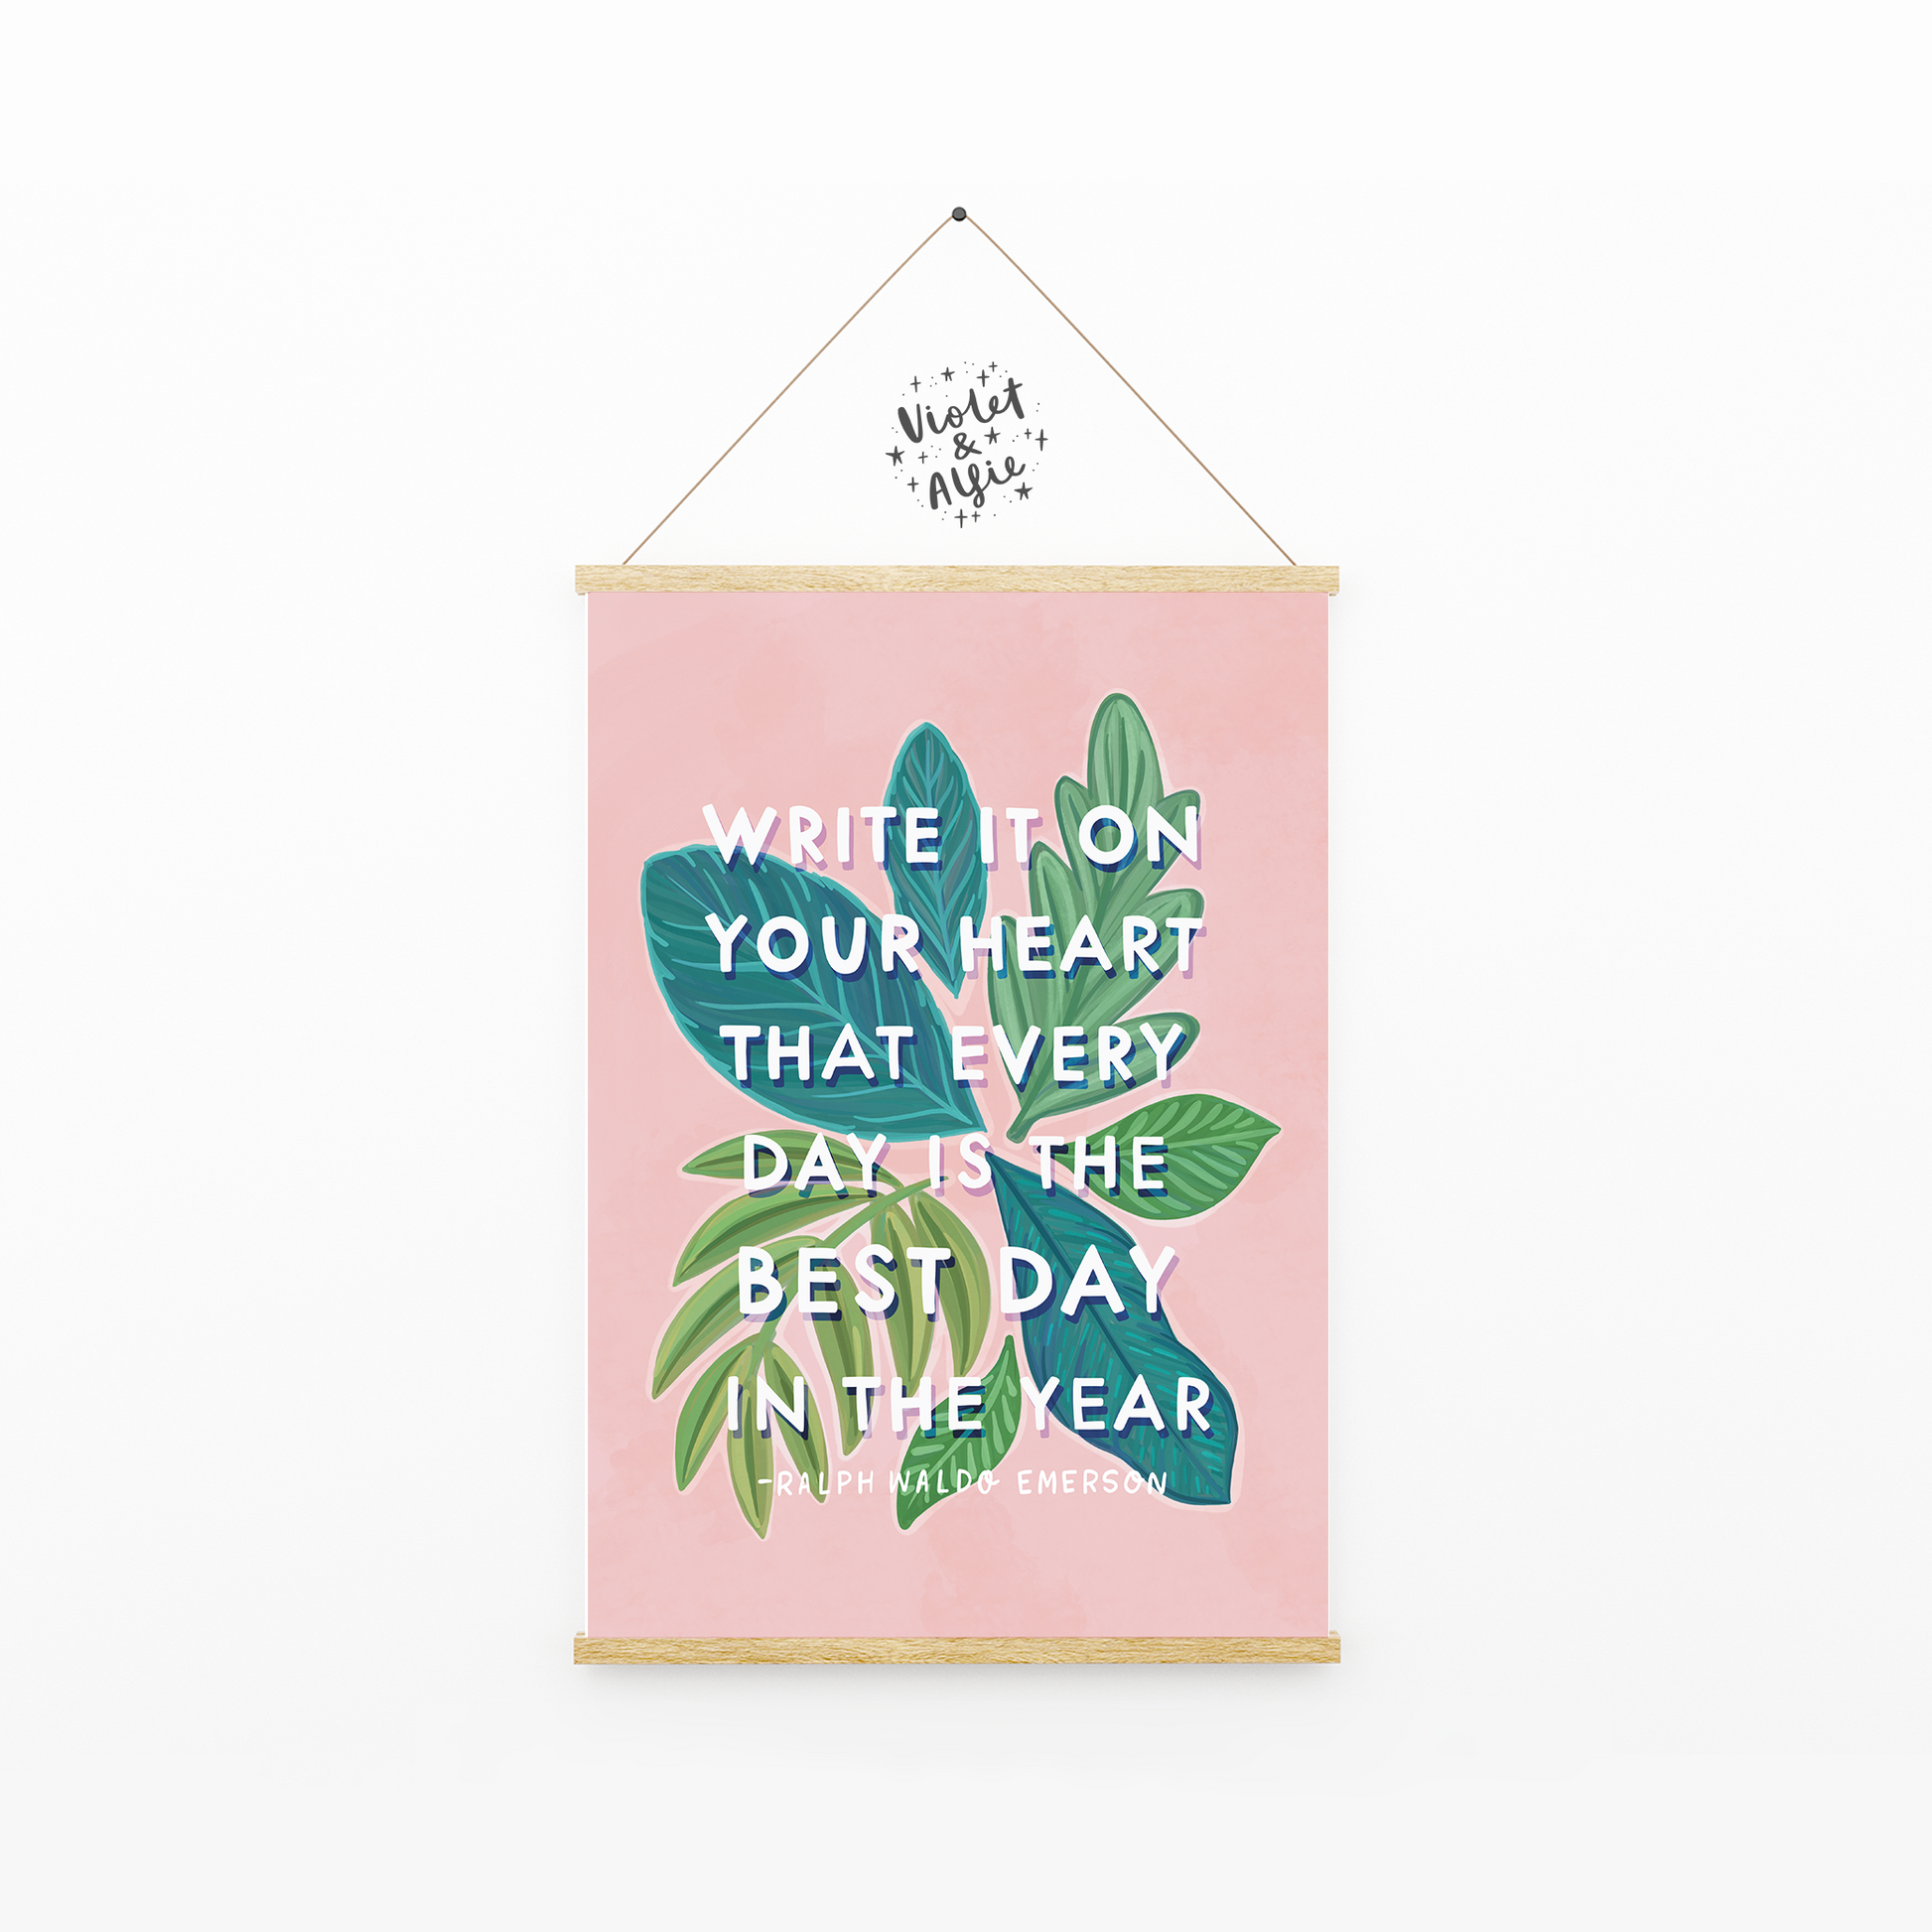 write it on your heart that every day is the best day in the year, Ralph Waldo Emerson, Quote Print, Inspirational Quote, Positivity Gift, Motivational Wall Art, Botanical Prints, Plant Wall Art, Colourful Decor